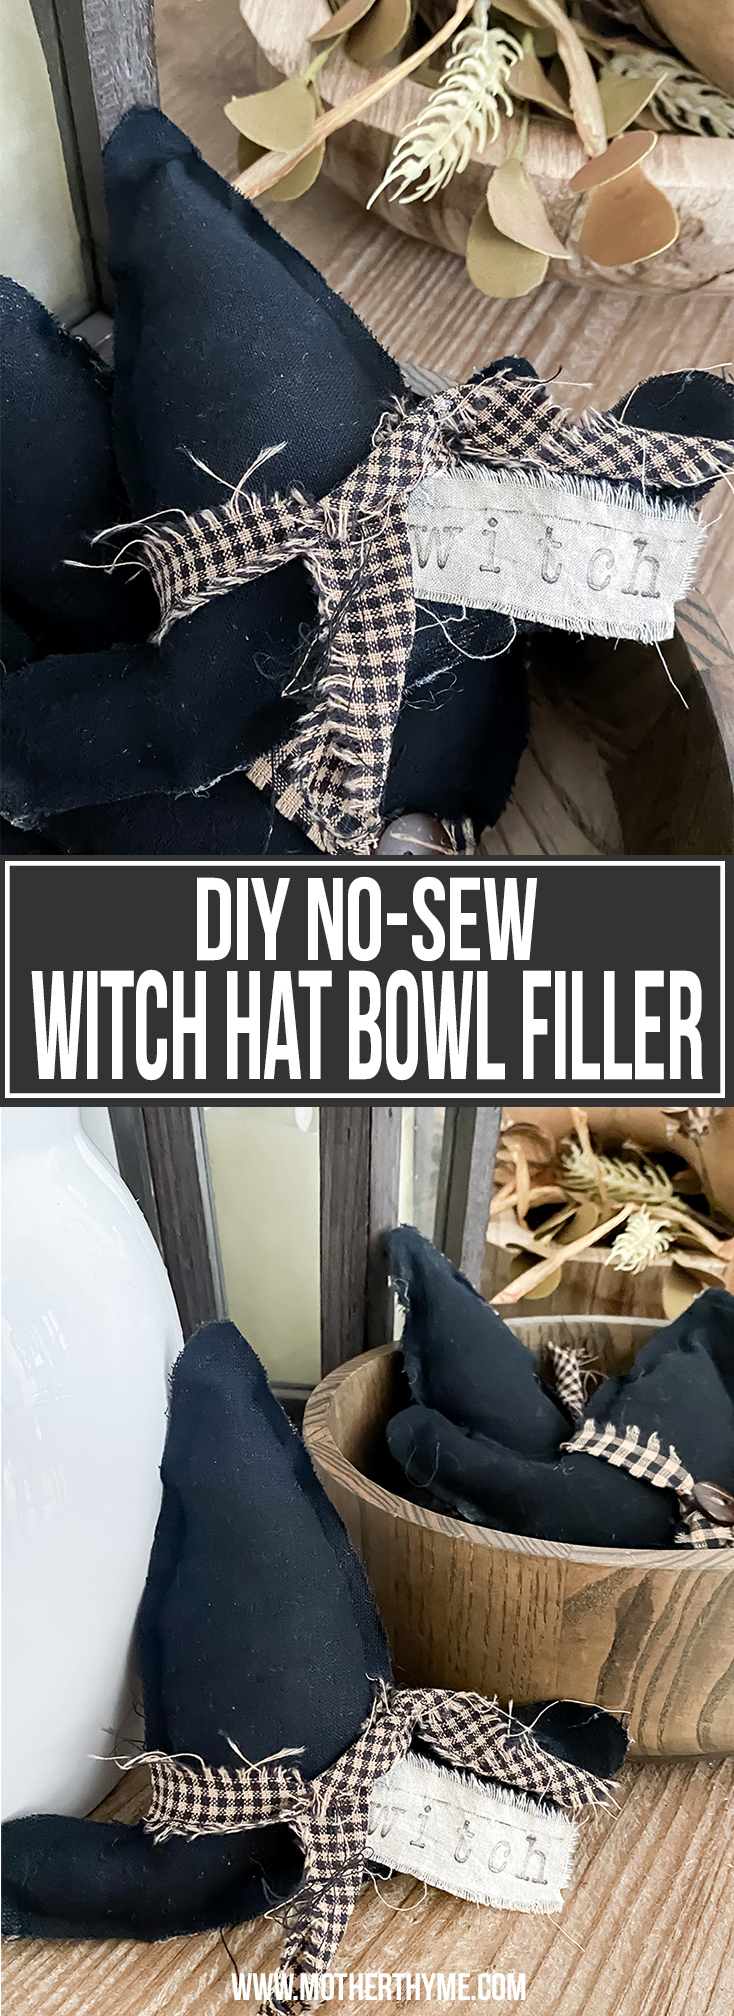 NO-SEW WITCH HAT BOWL FILLER